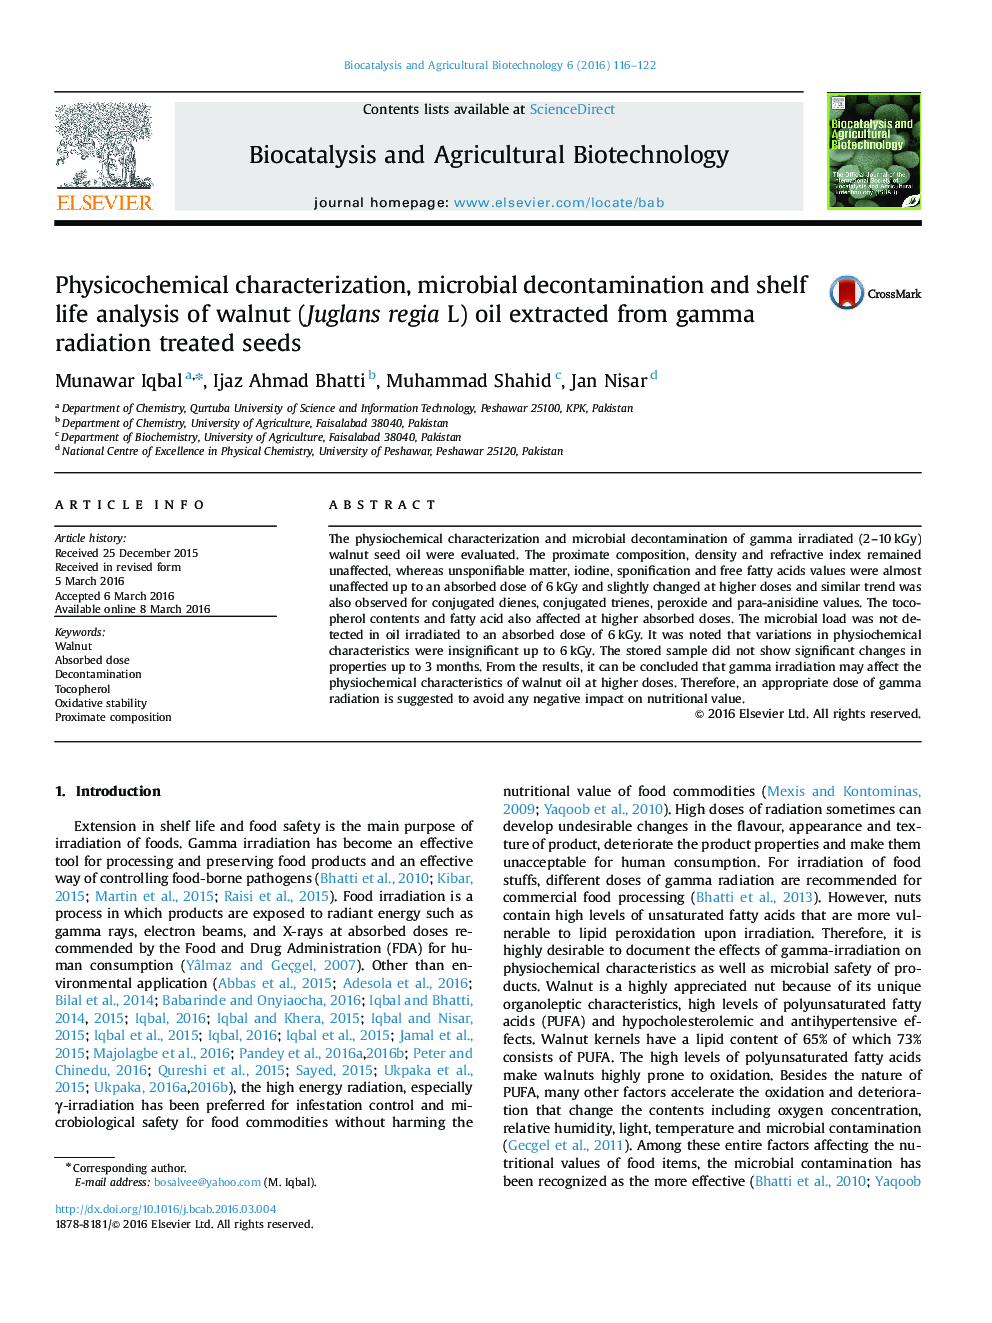 Physicochemical characterization, microbial decontamination and shelf life analysis of walnut (Juglans regia L) oil extracted from gamma radiation treated seeds